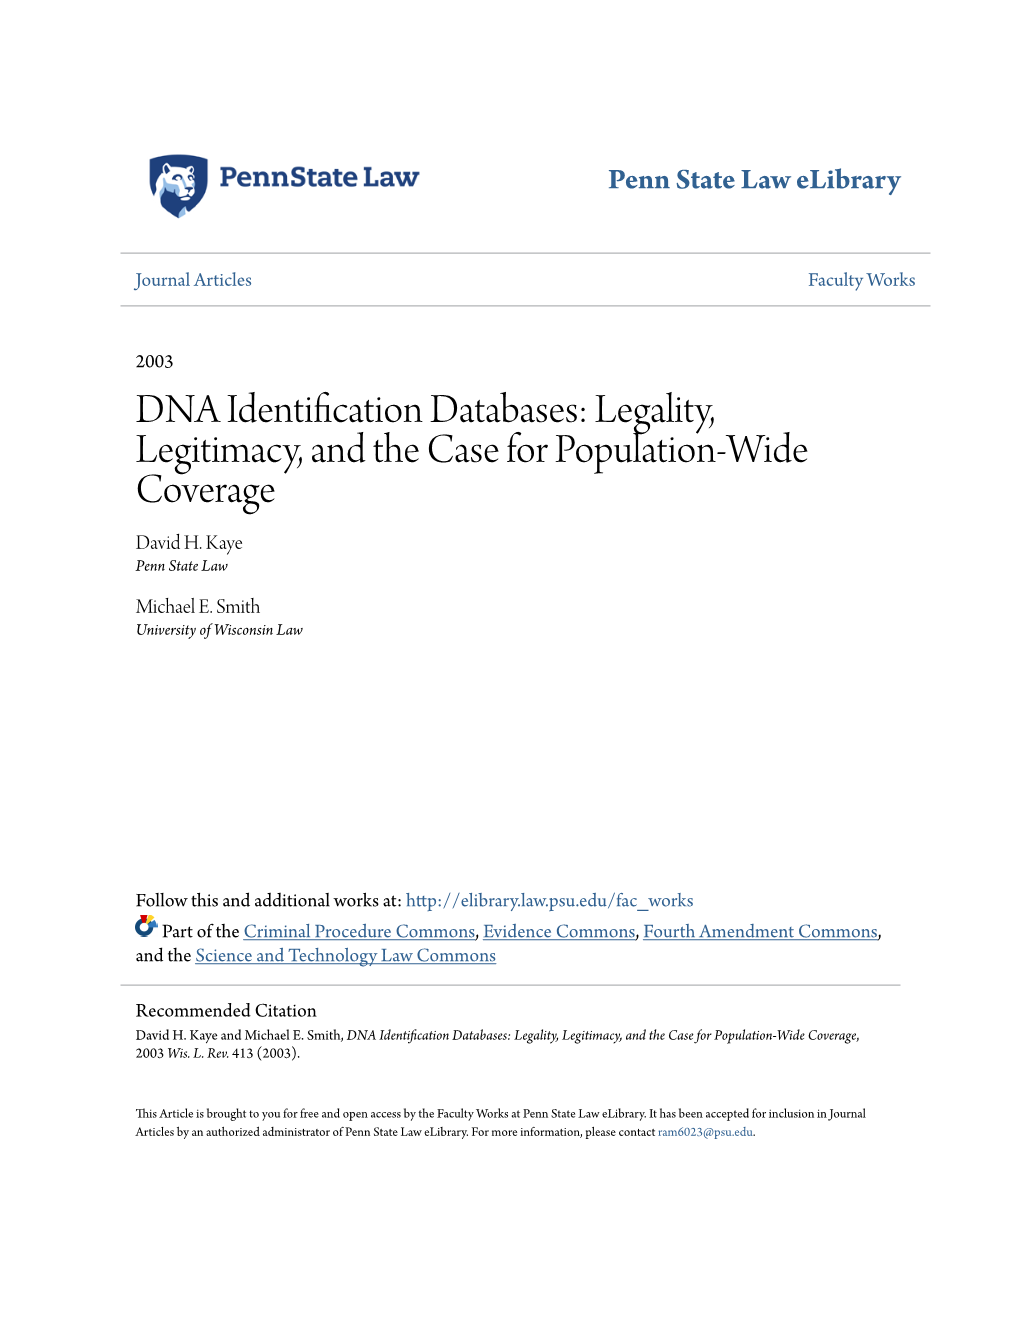 Legality, Legitimacy, and the Case for Population-Wide Coverage David H